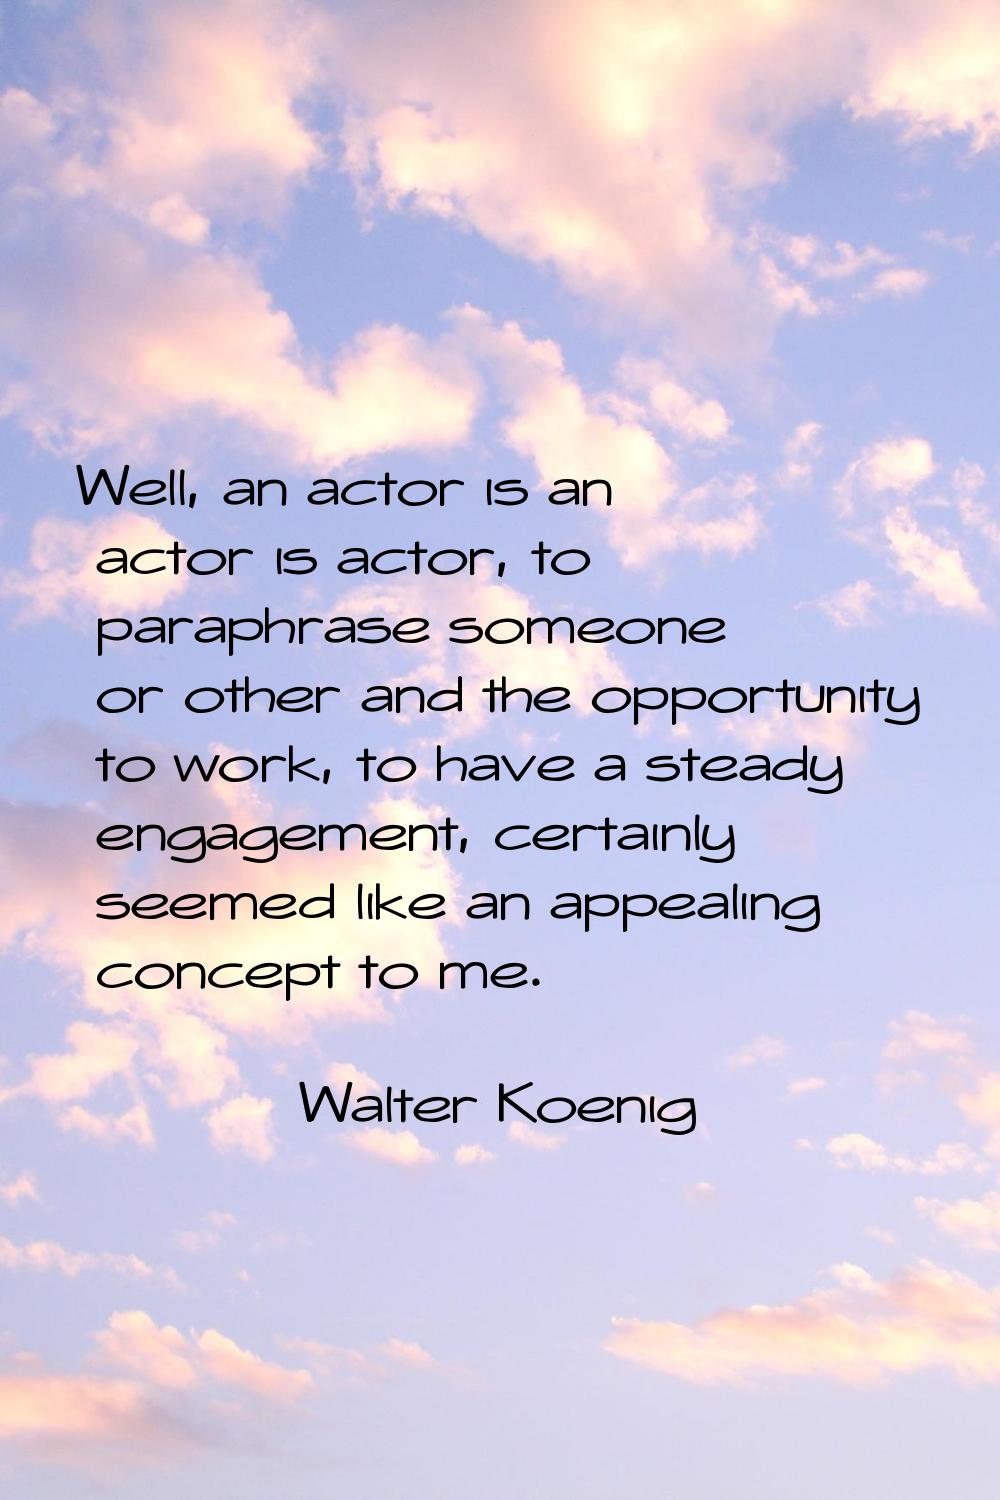 Well, an actor is an actor is actor, to paraphrase someone or other and the opportunity to work, to